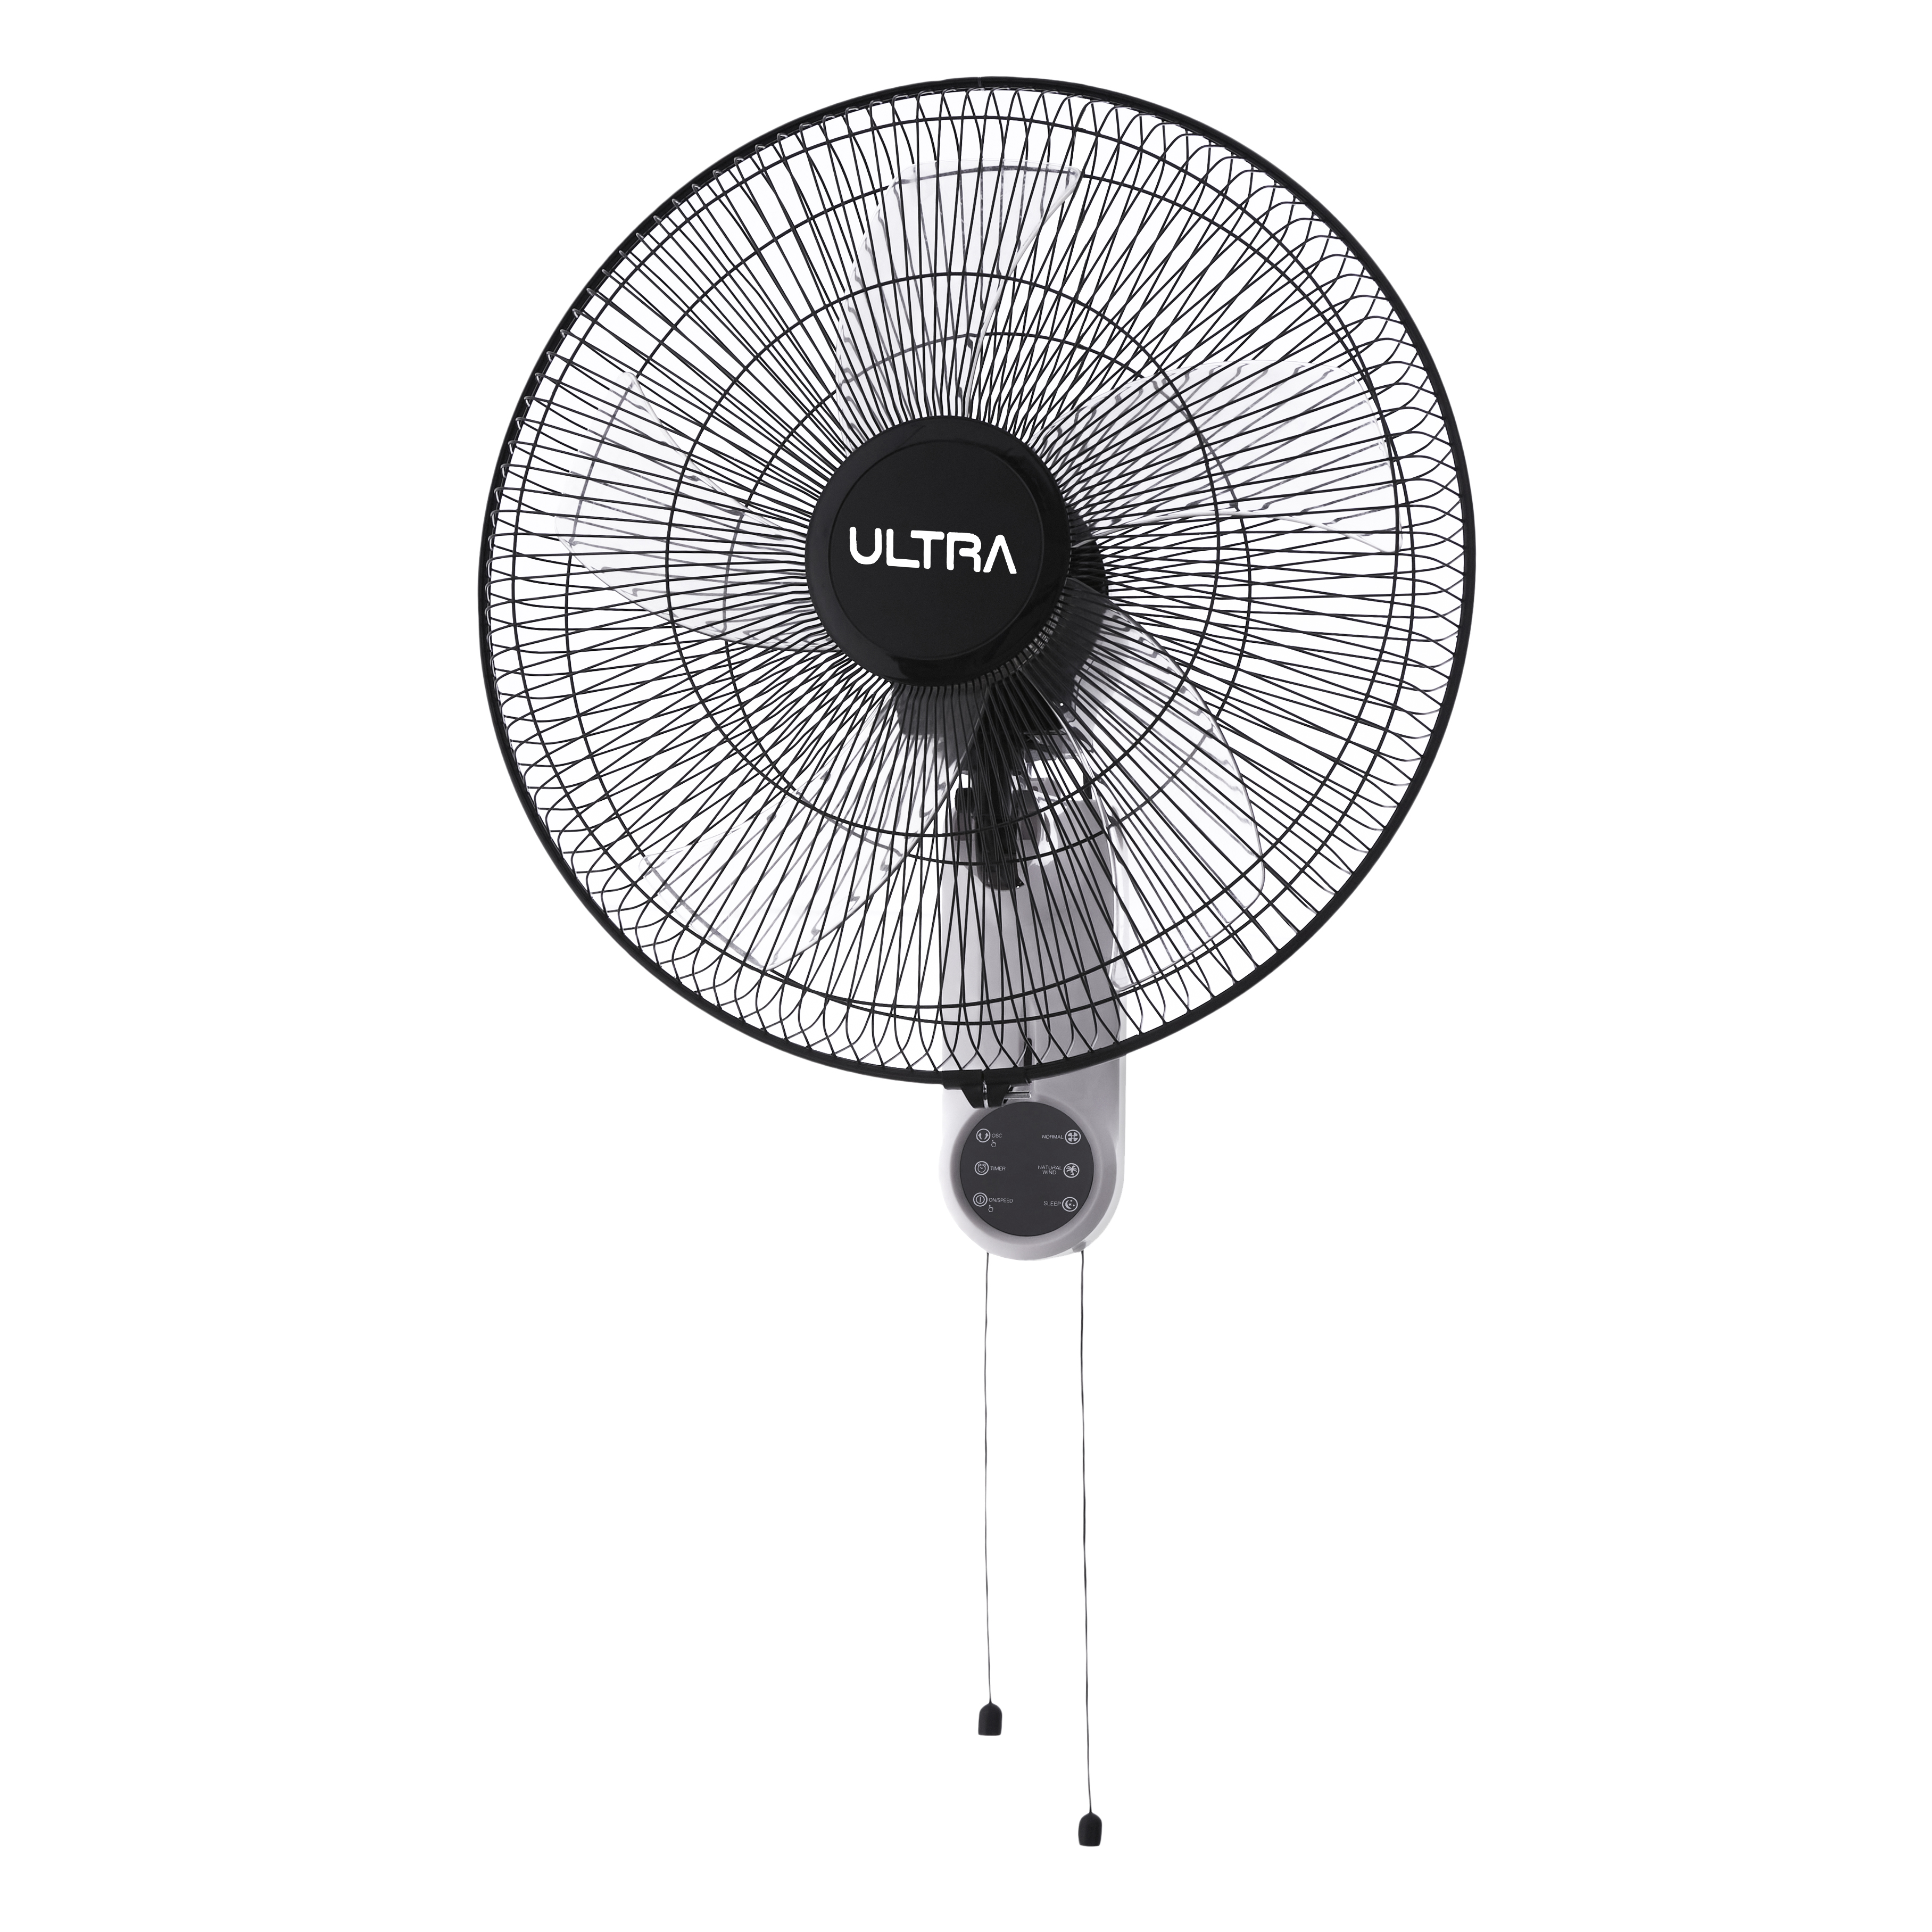 Ultra Wall Mount Fan with Remote Control, 18 Inch, Black and White - UFW18RE1